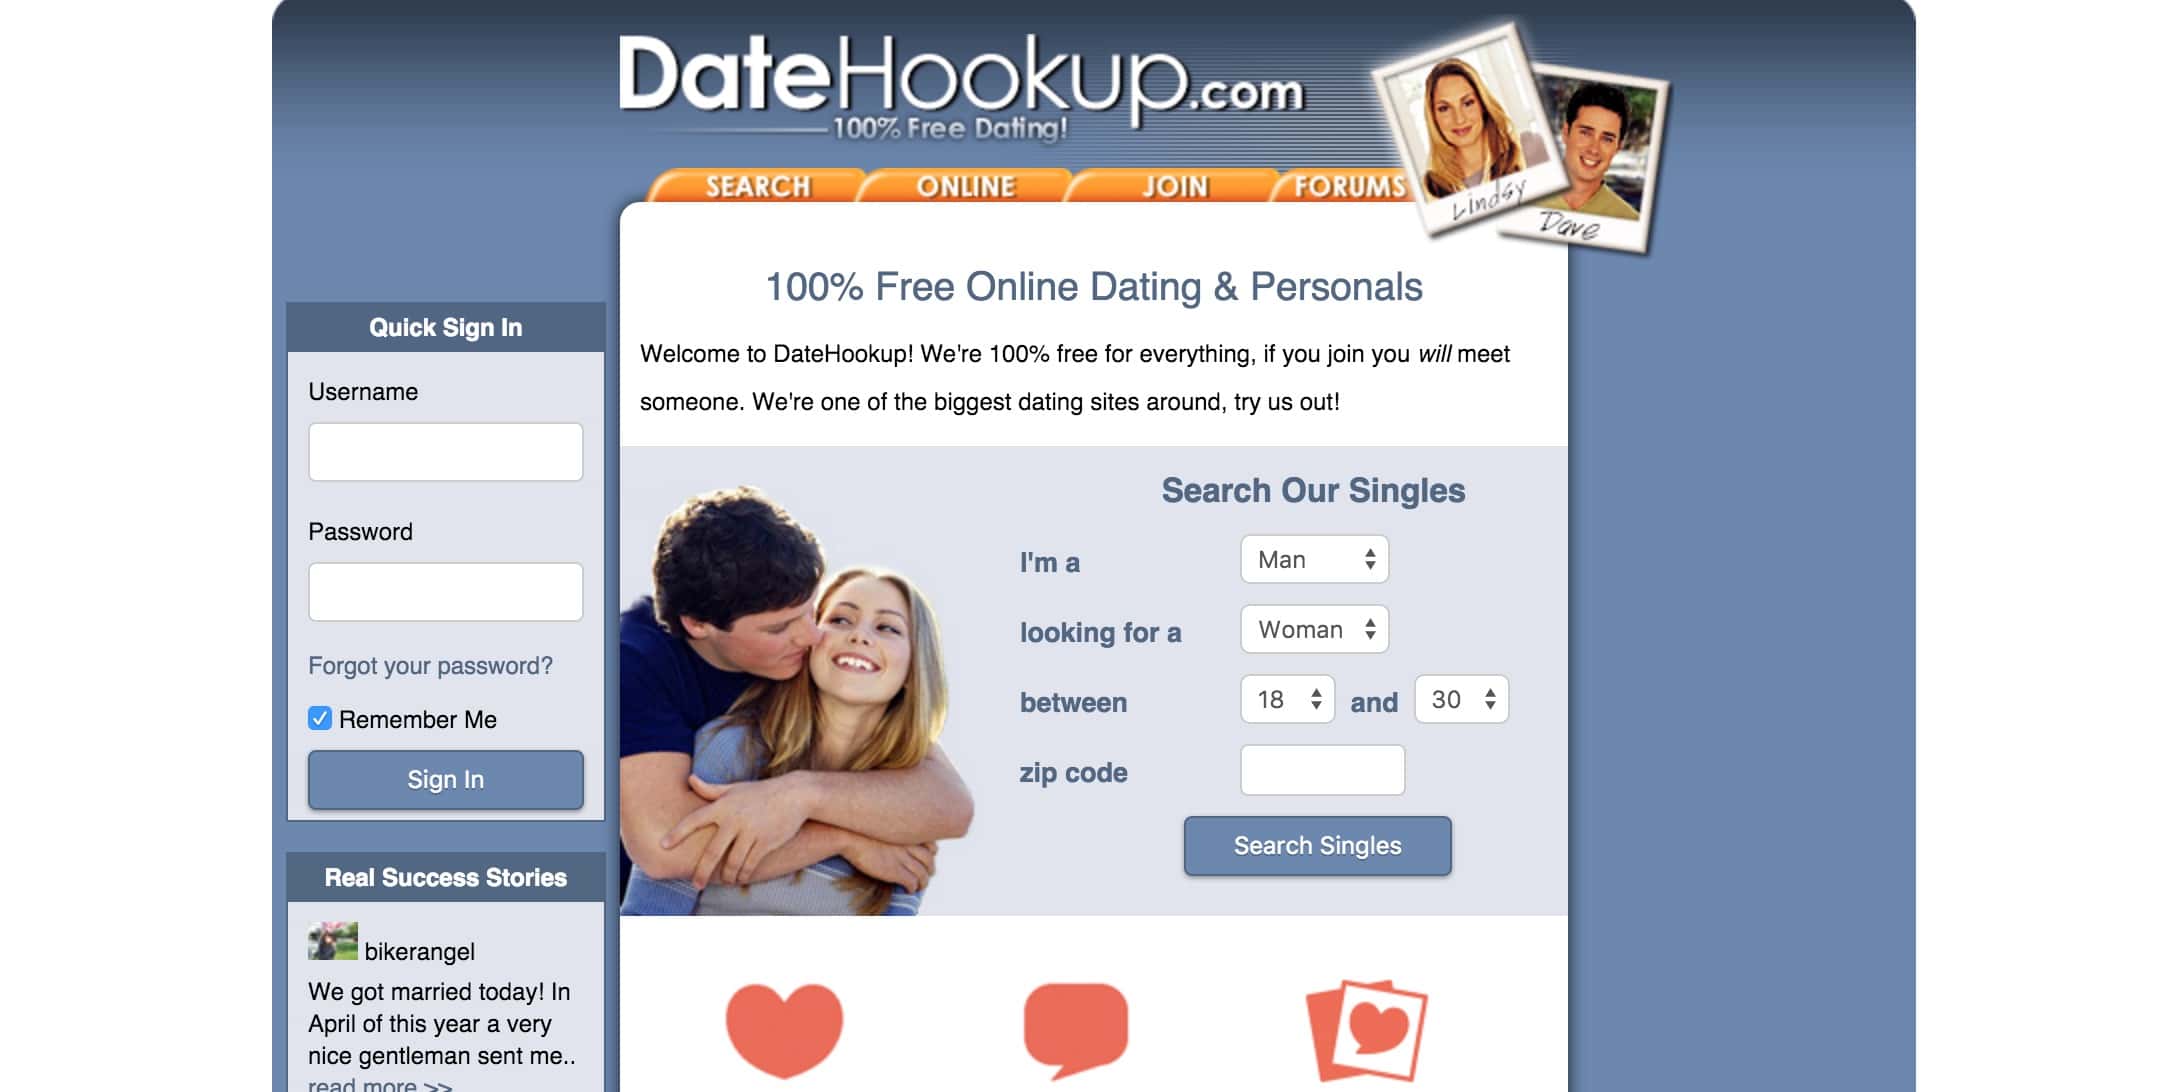 How to find someone from online dating site on facebook